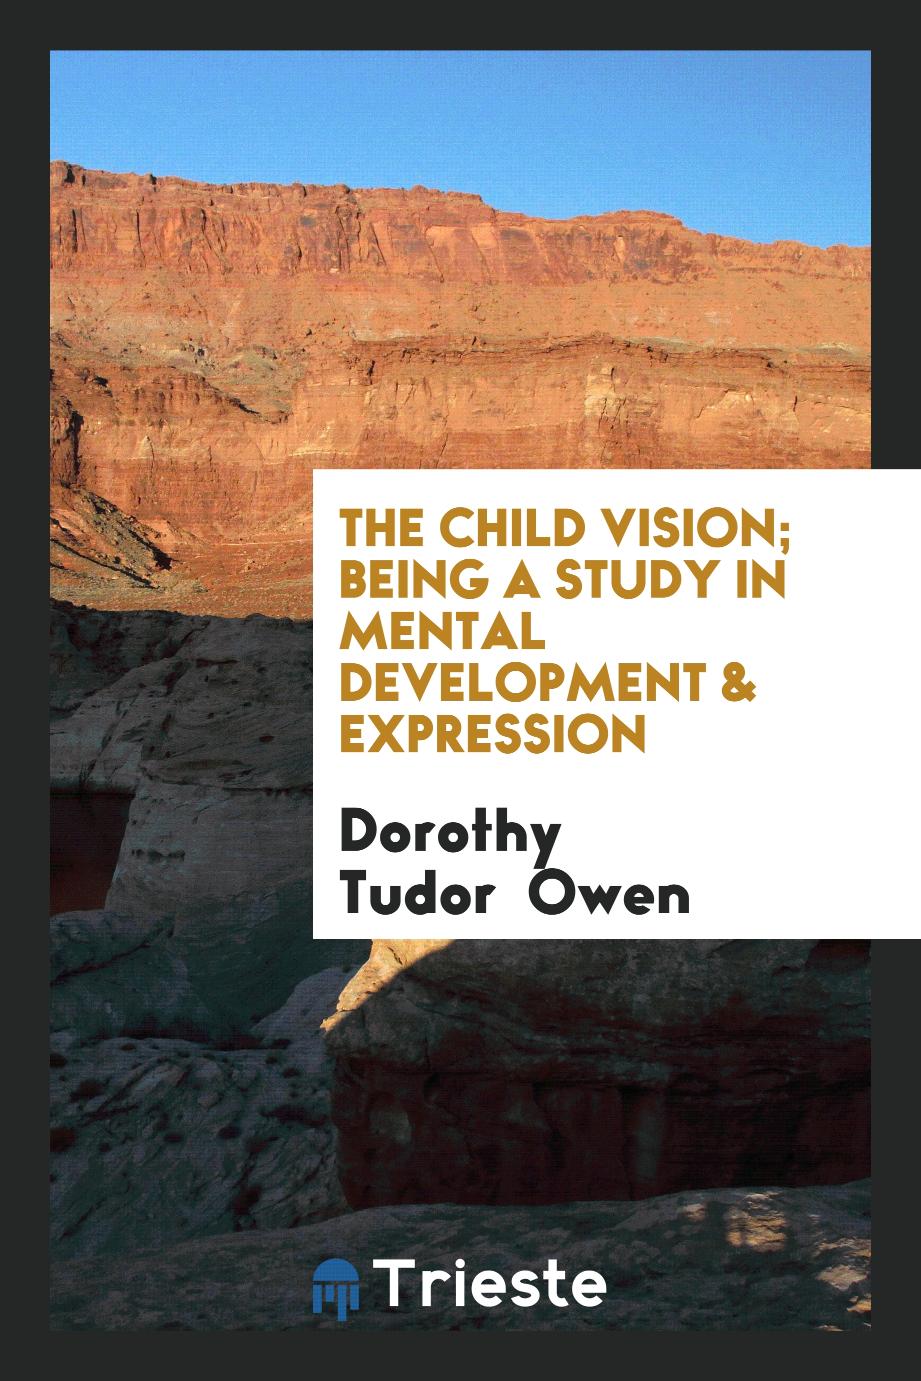 The child vision; being a study in mental development & expression